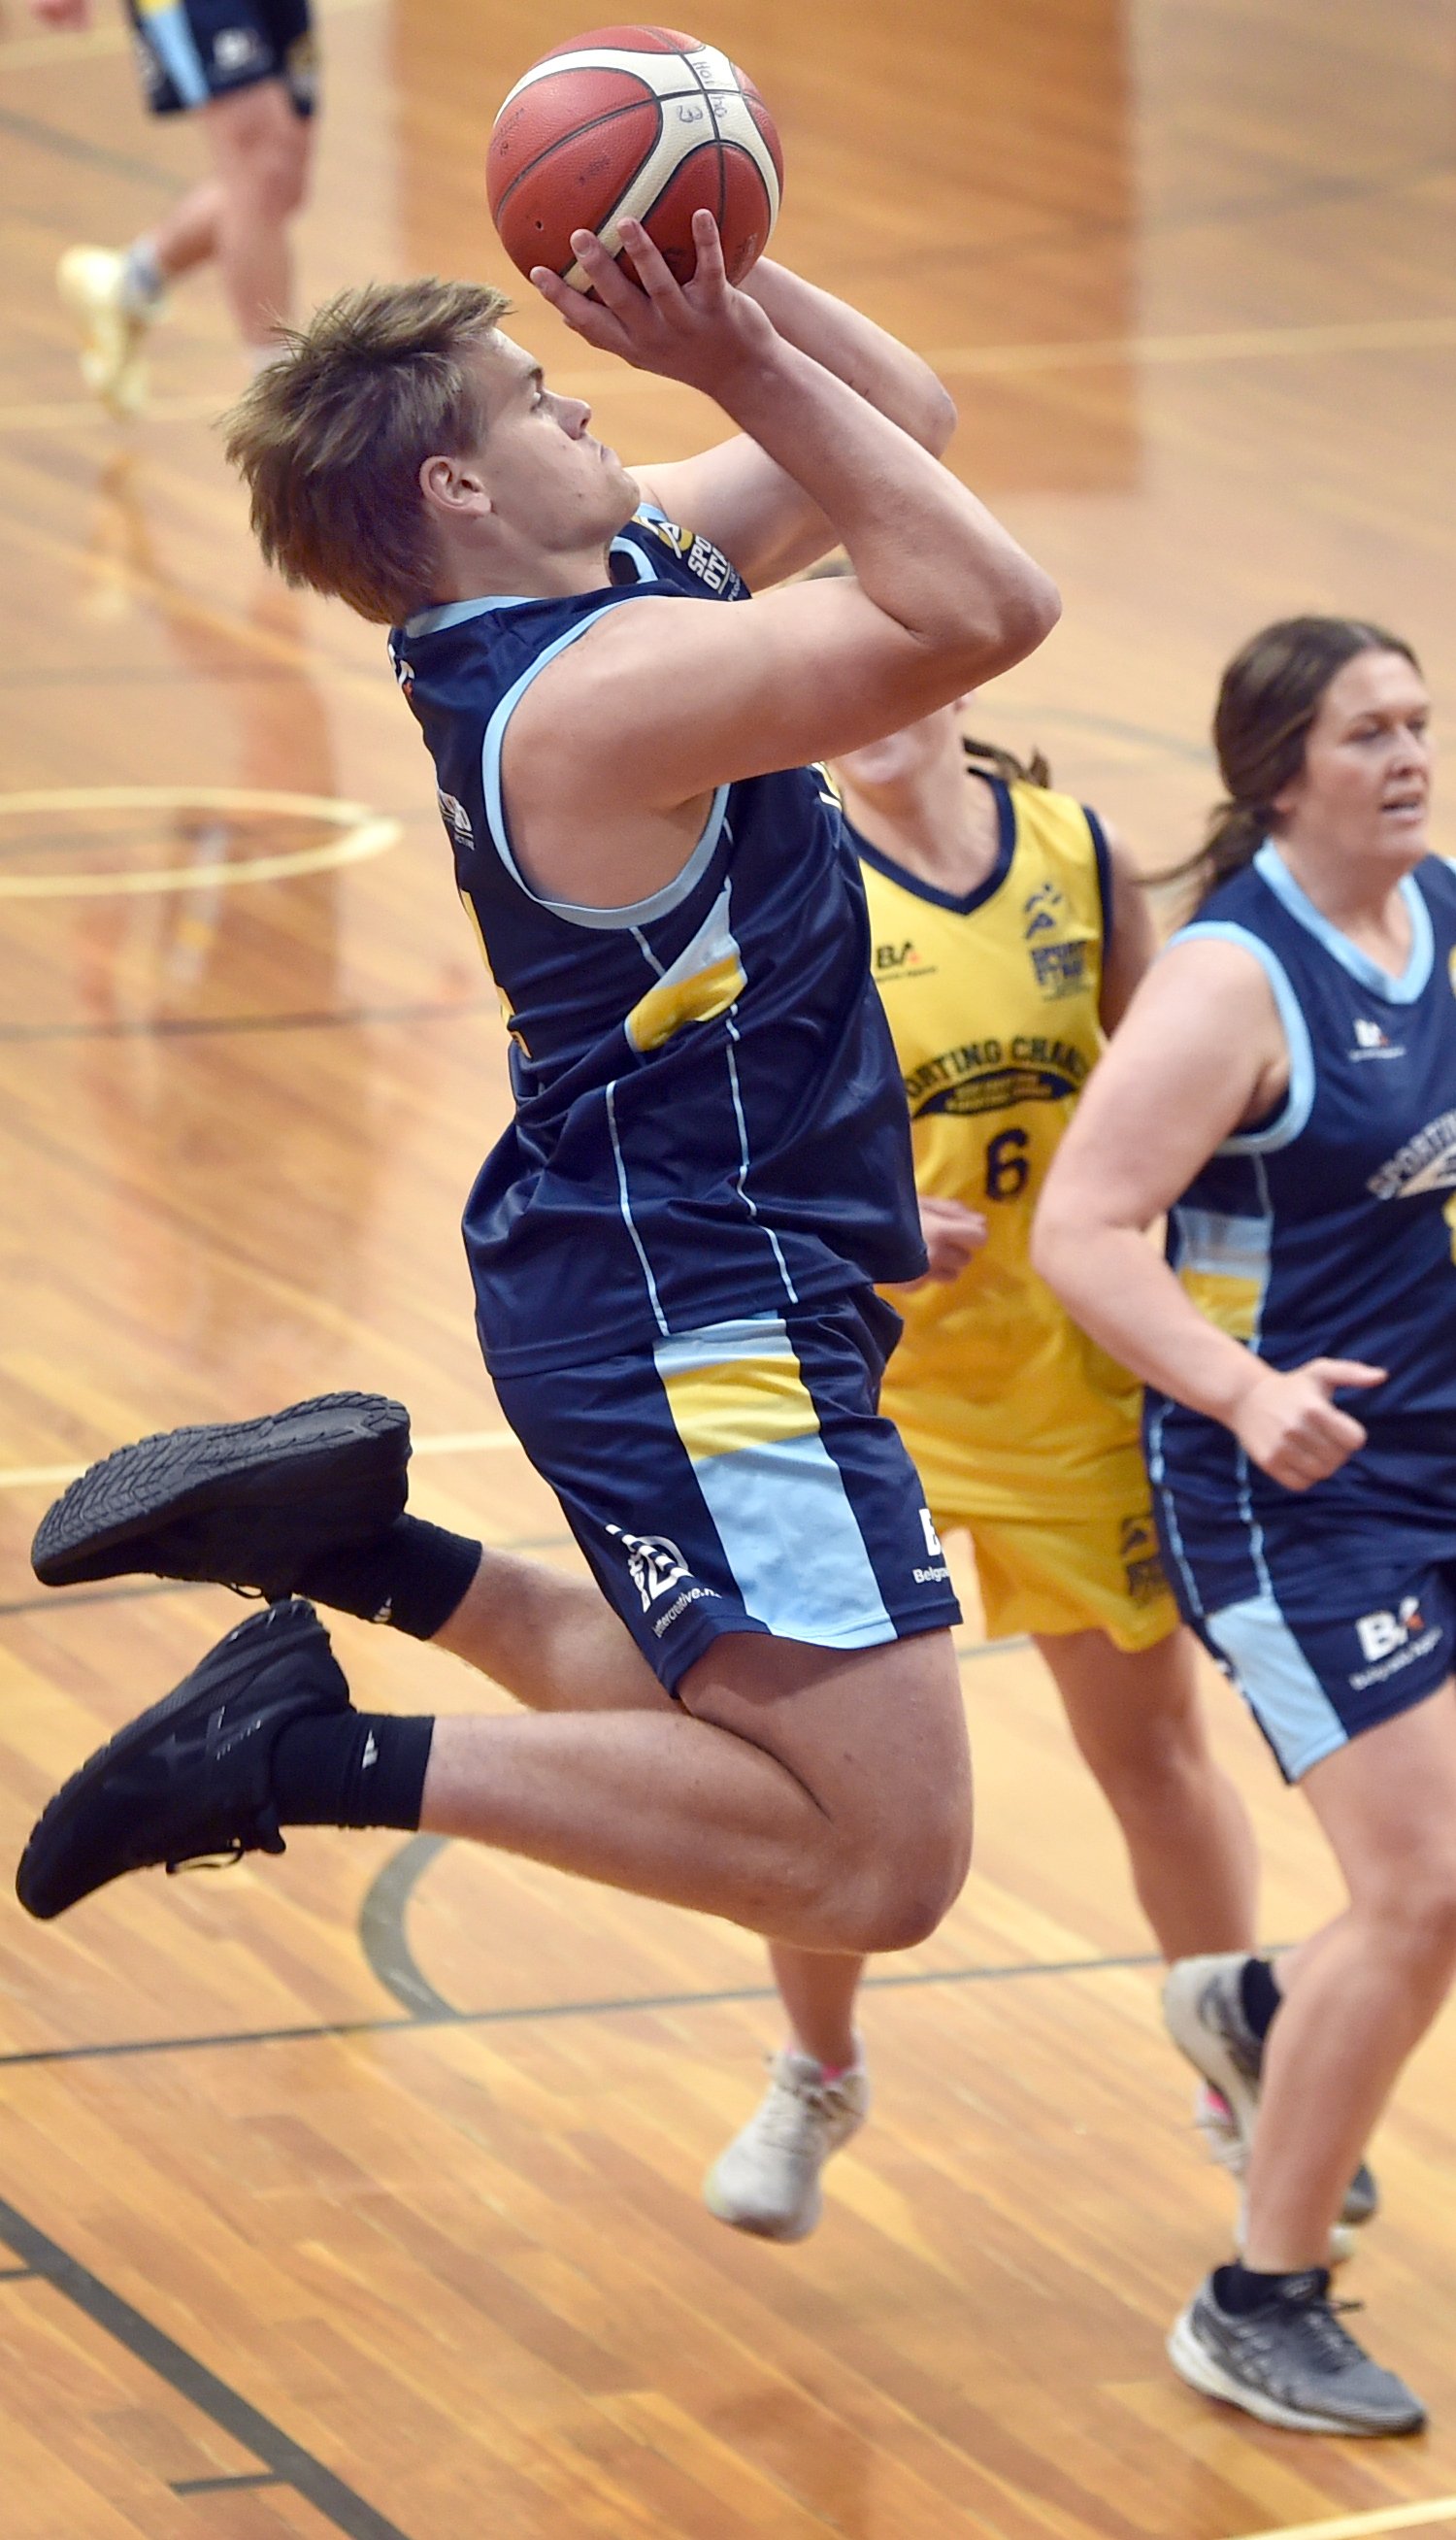 Otago rugby player Harry Taylor, representing team blue, goes for the hoop in the Sport Otago All...